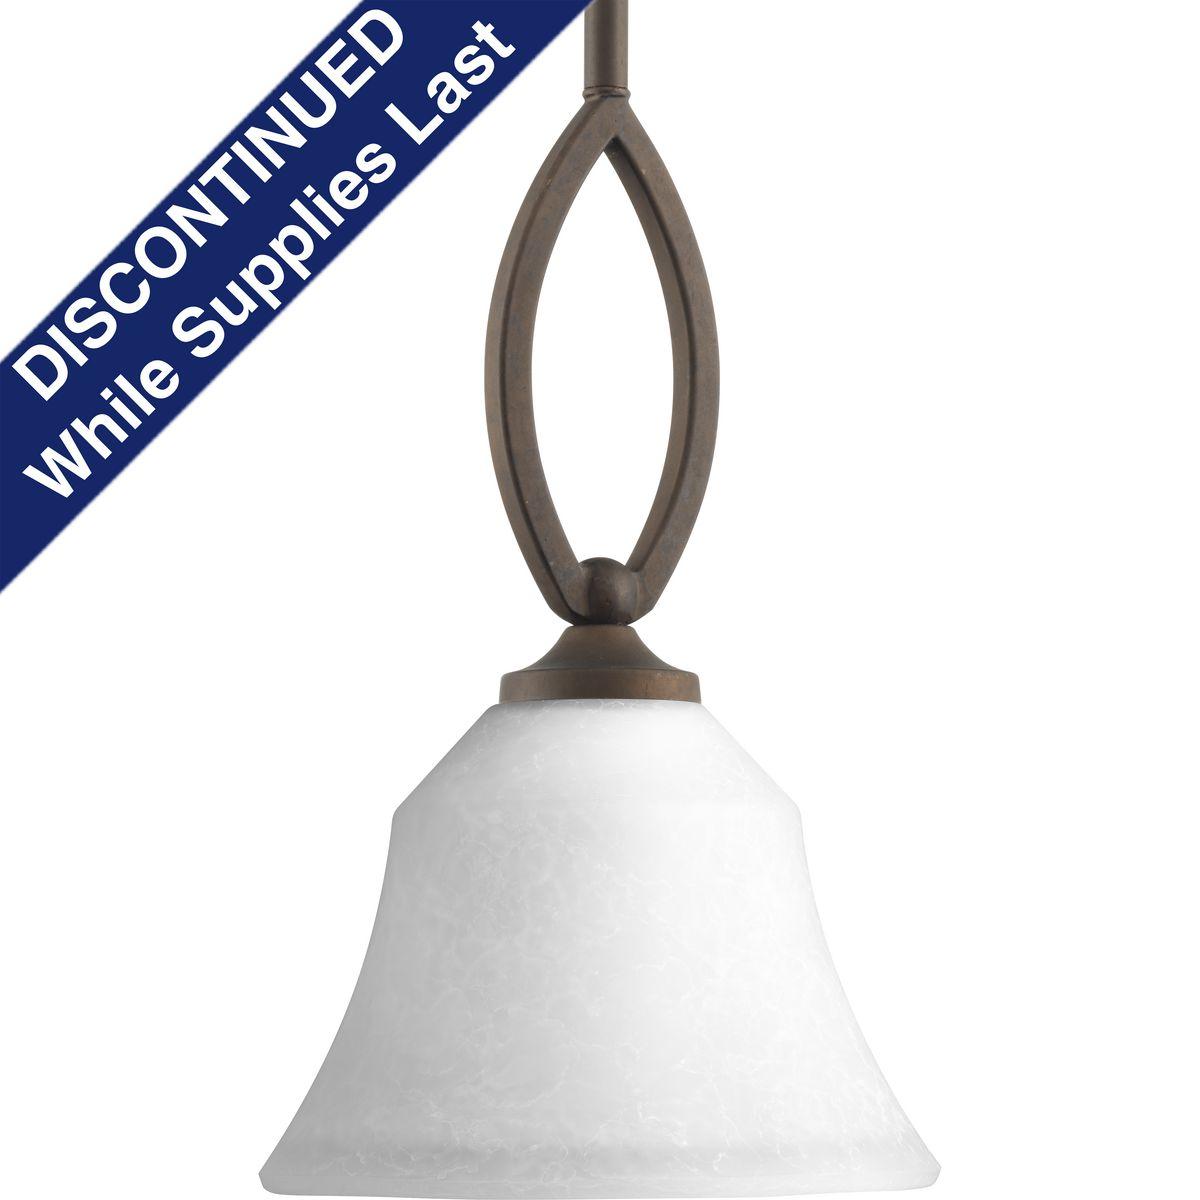 Hubbell P5621-102 An example of genuine craftsmanship, Monogram one-light mini-pendant makes its mark with modern, yet simple, scrolling forms. A watermark finish creates rich depth on the glass diffusers supported by the elegant bronze finish frame.  ; Modern, yet simple,